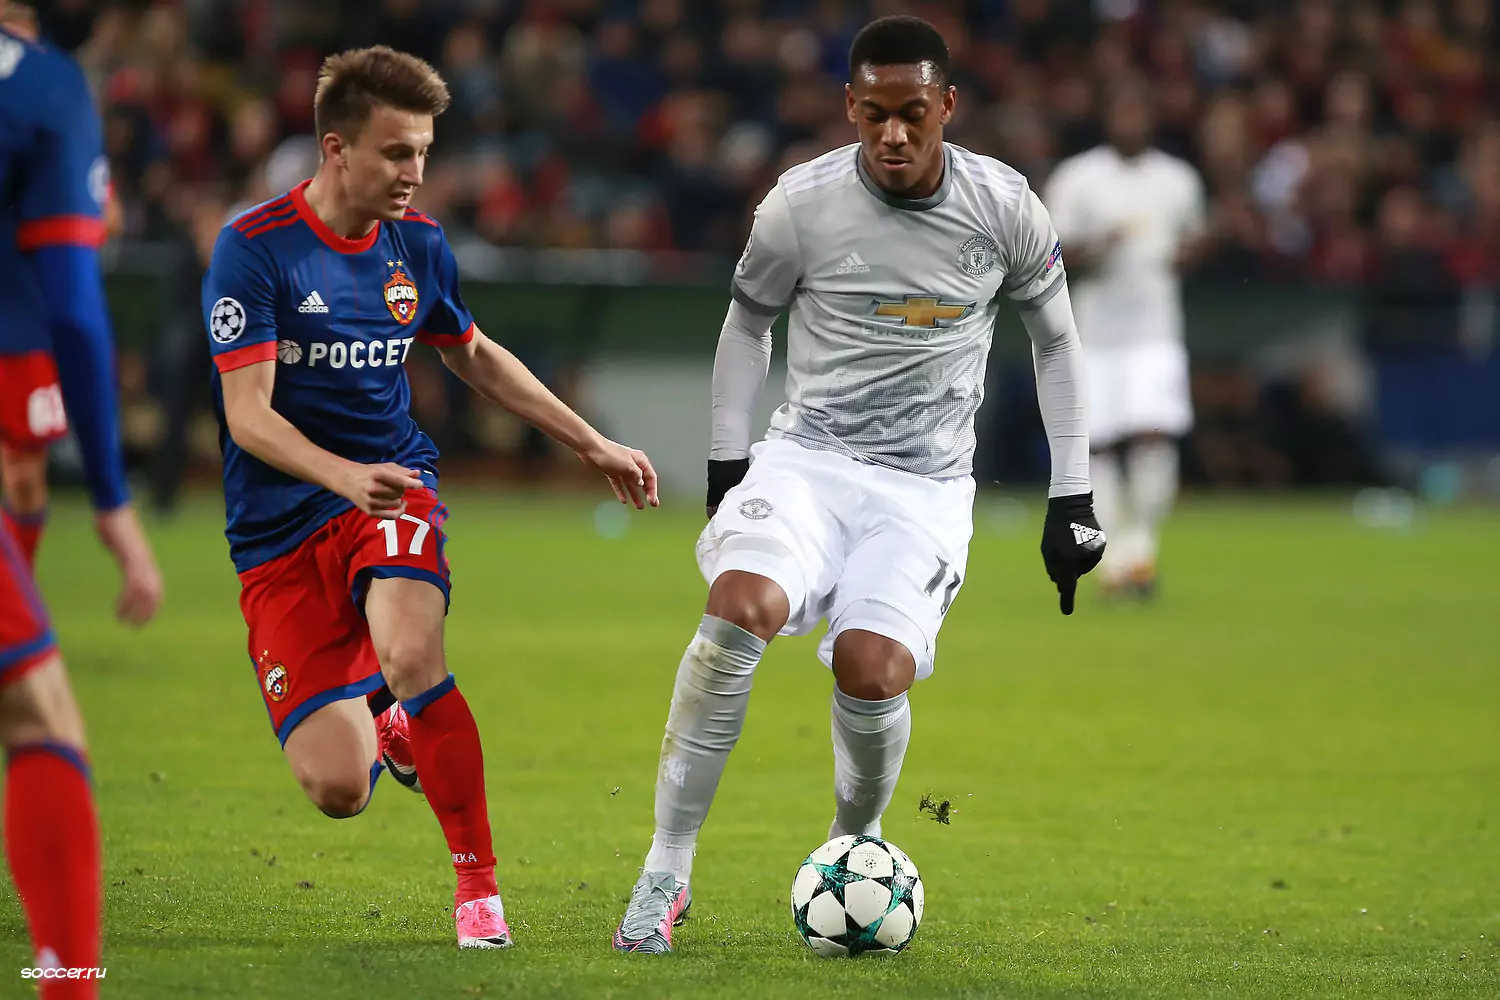 Manchester United's Anthony Martial playing against CSKA Moscow in the Champions League